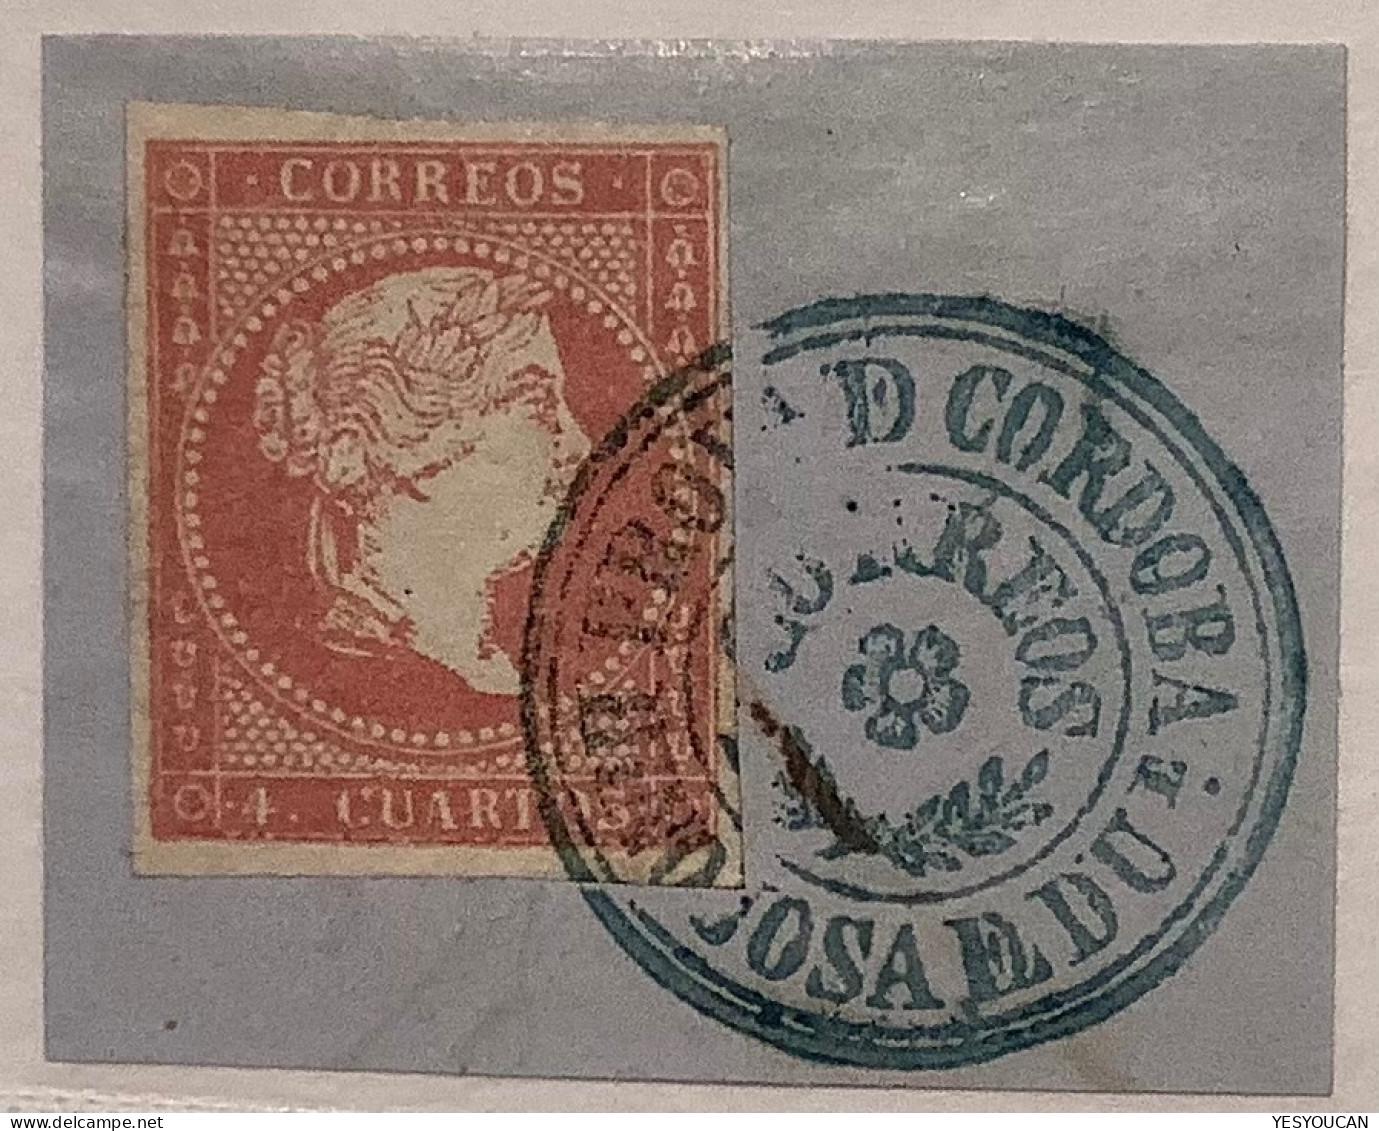 España Andalucía1856 Matasello CORDOBA / HINOJOSA DEL DUQUE 48 (absinthe Vegetable Cuisine Fenouil Cooking Fennel Comex - Used Stamps